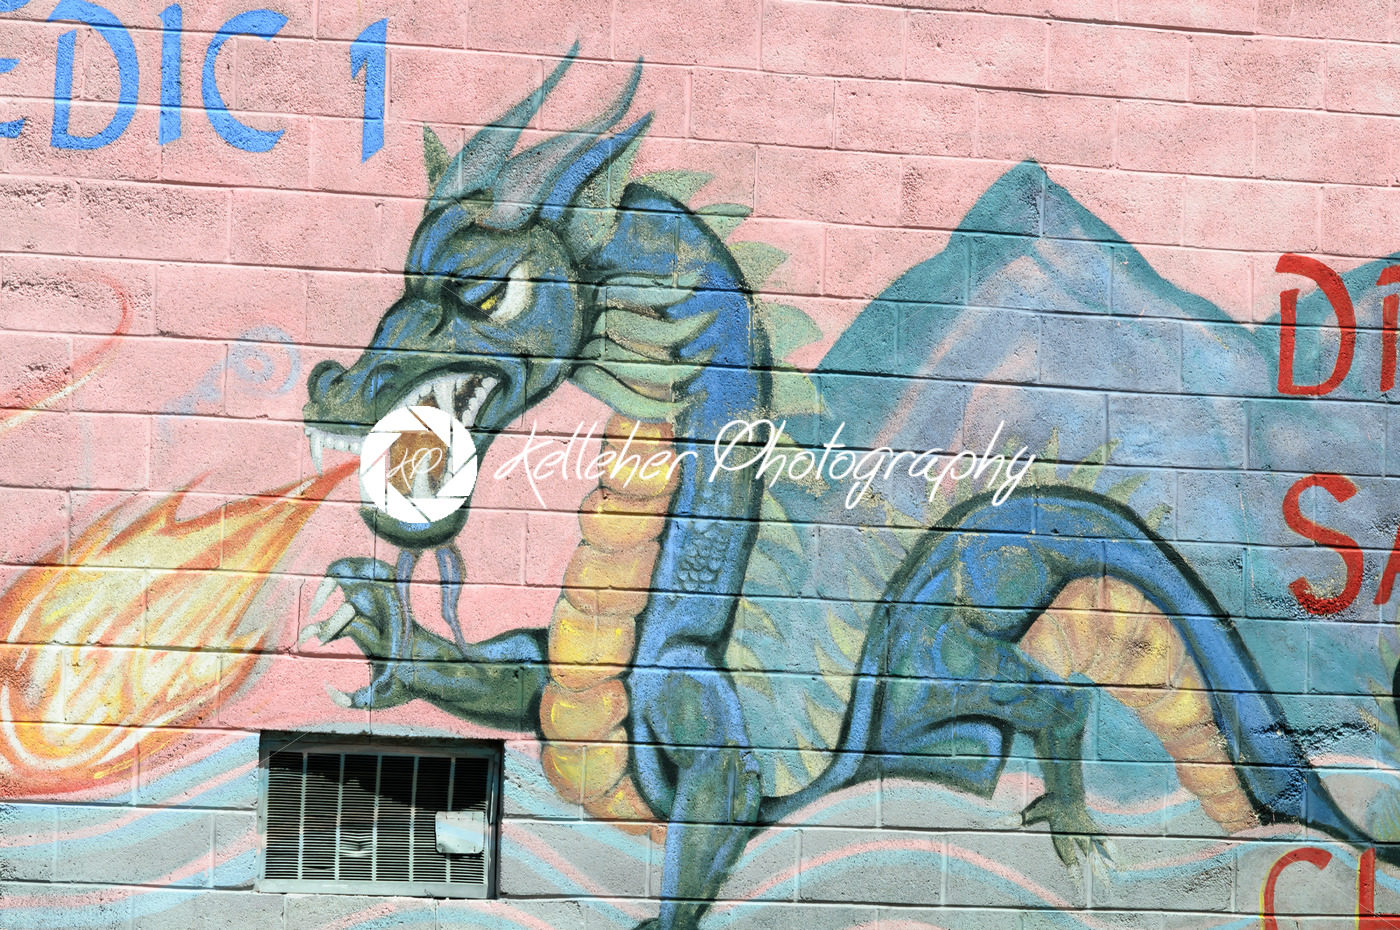 PHILADELPHIA, PA – MAY 14: Fire breathing dragon graffti artwork mural in the Chinatown section of downtown Philadelphia on May 14, 2015 - Kelleher Photography Store